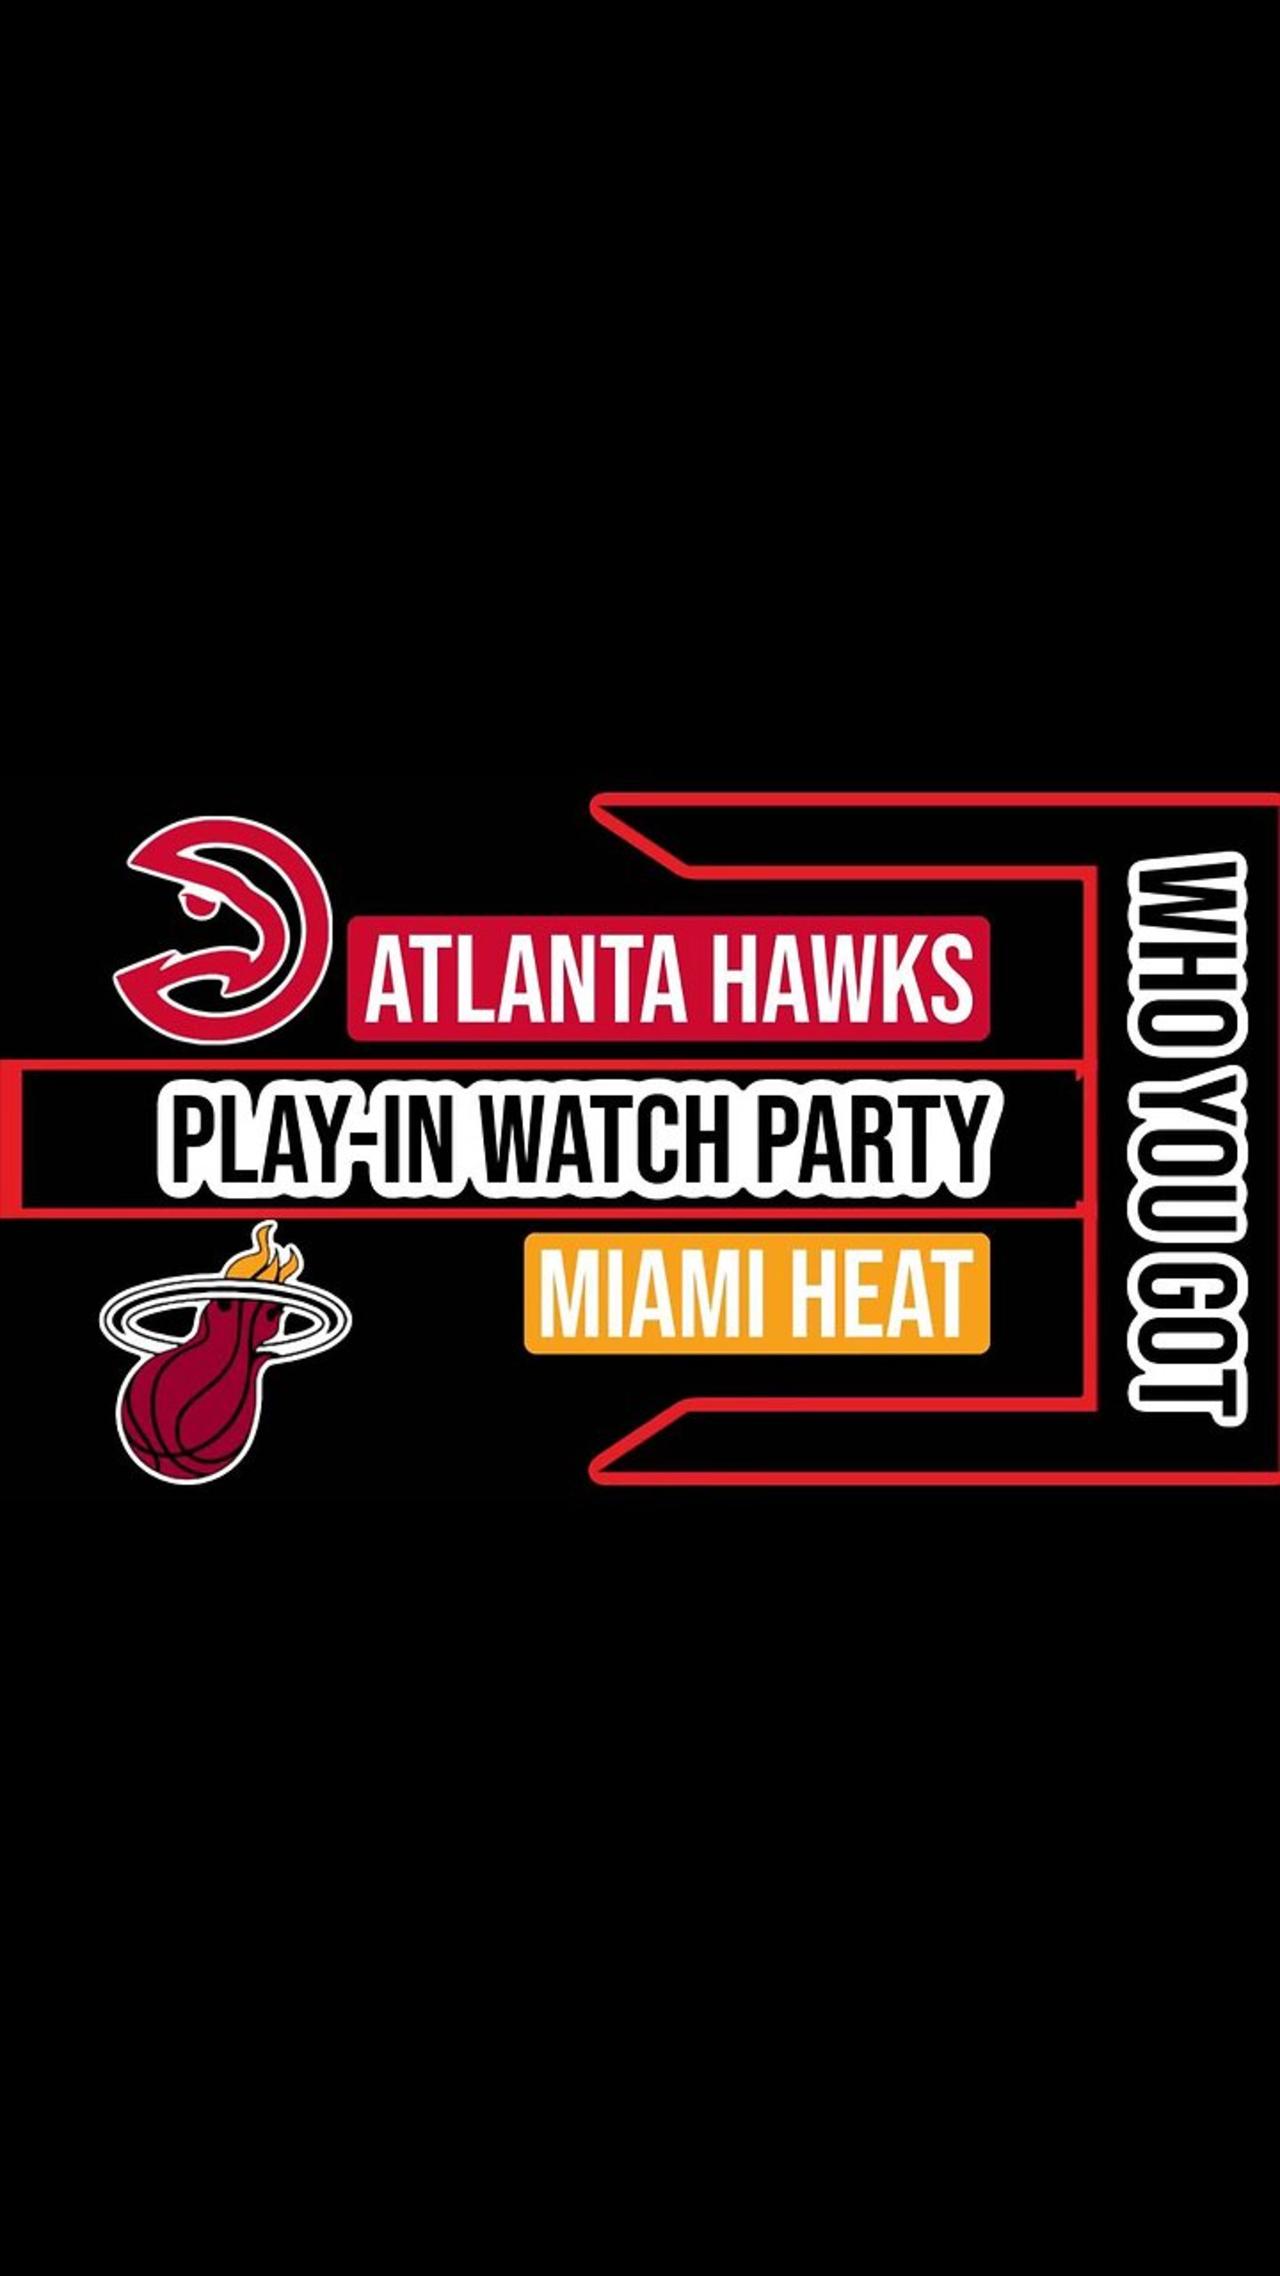 Join The Excitement: Atlanta Hawks Vs Miami Heat PLAY IN game: Live Watch Party